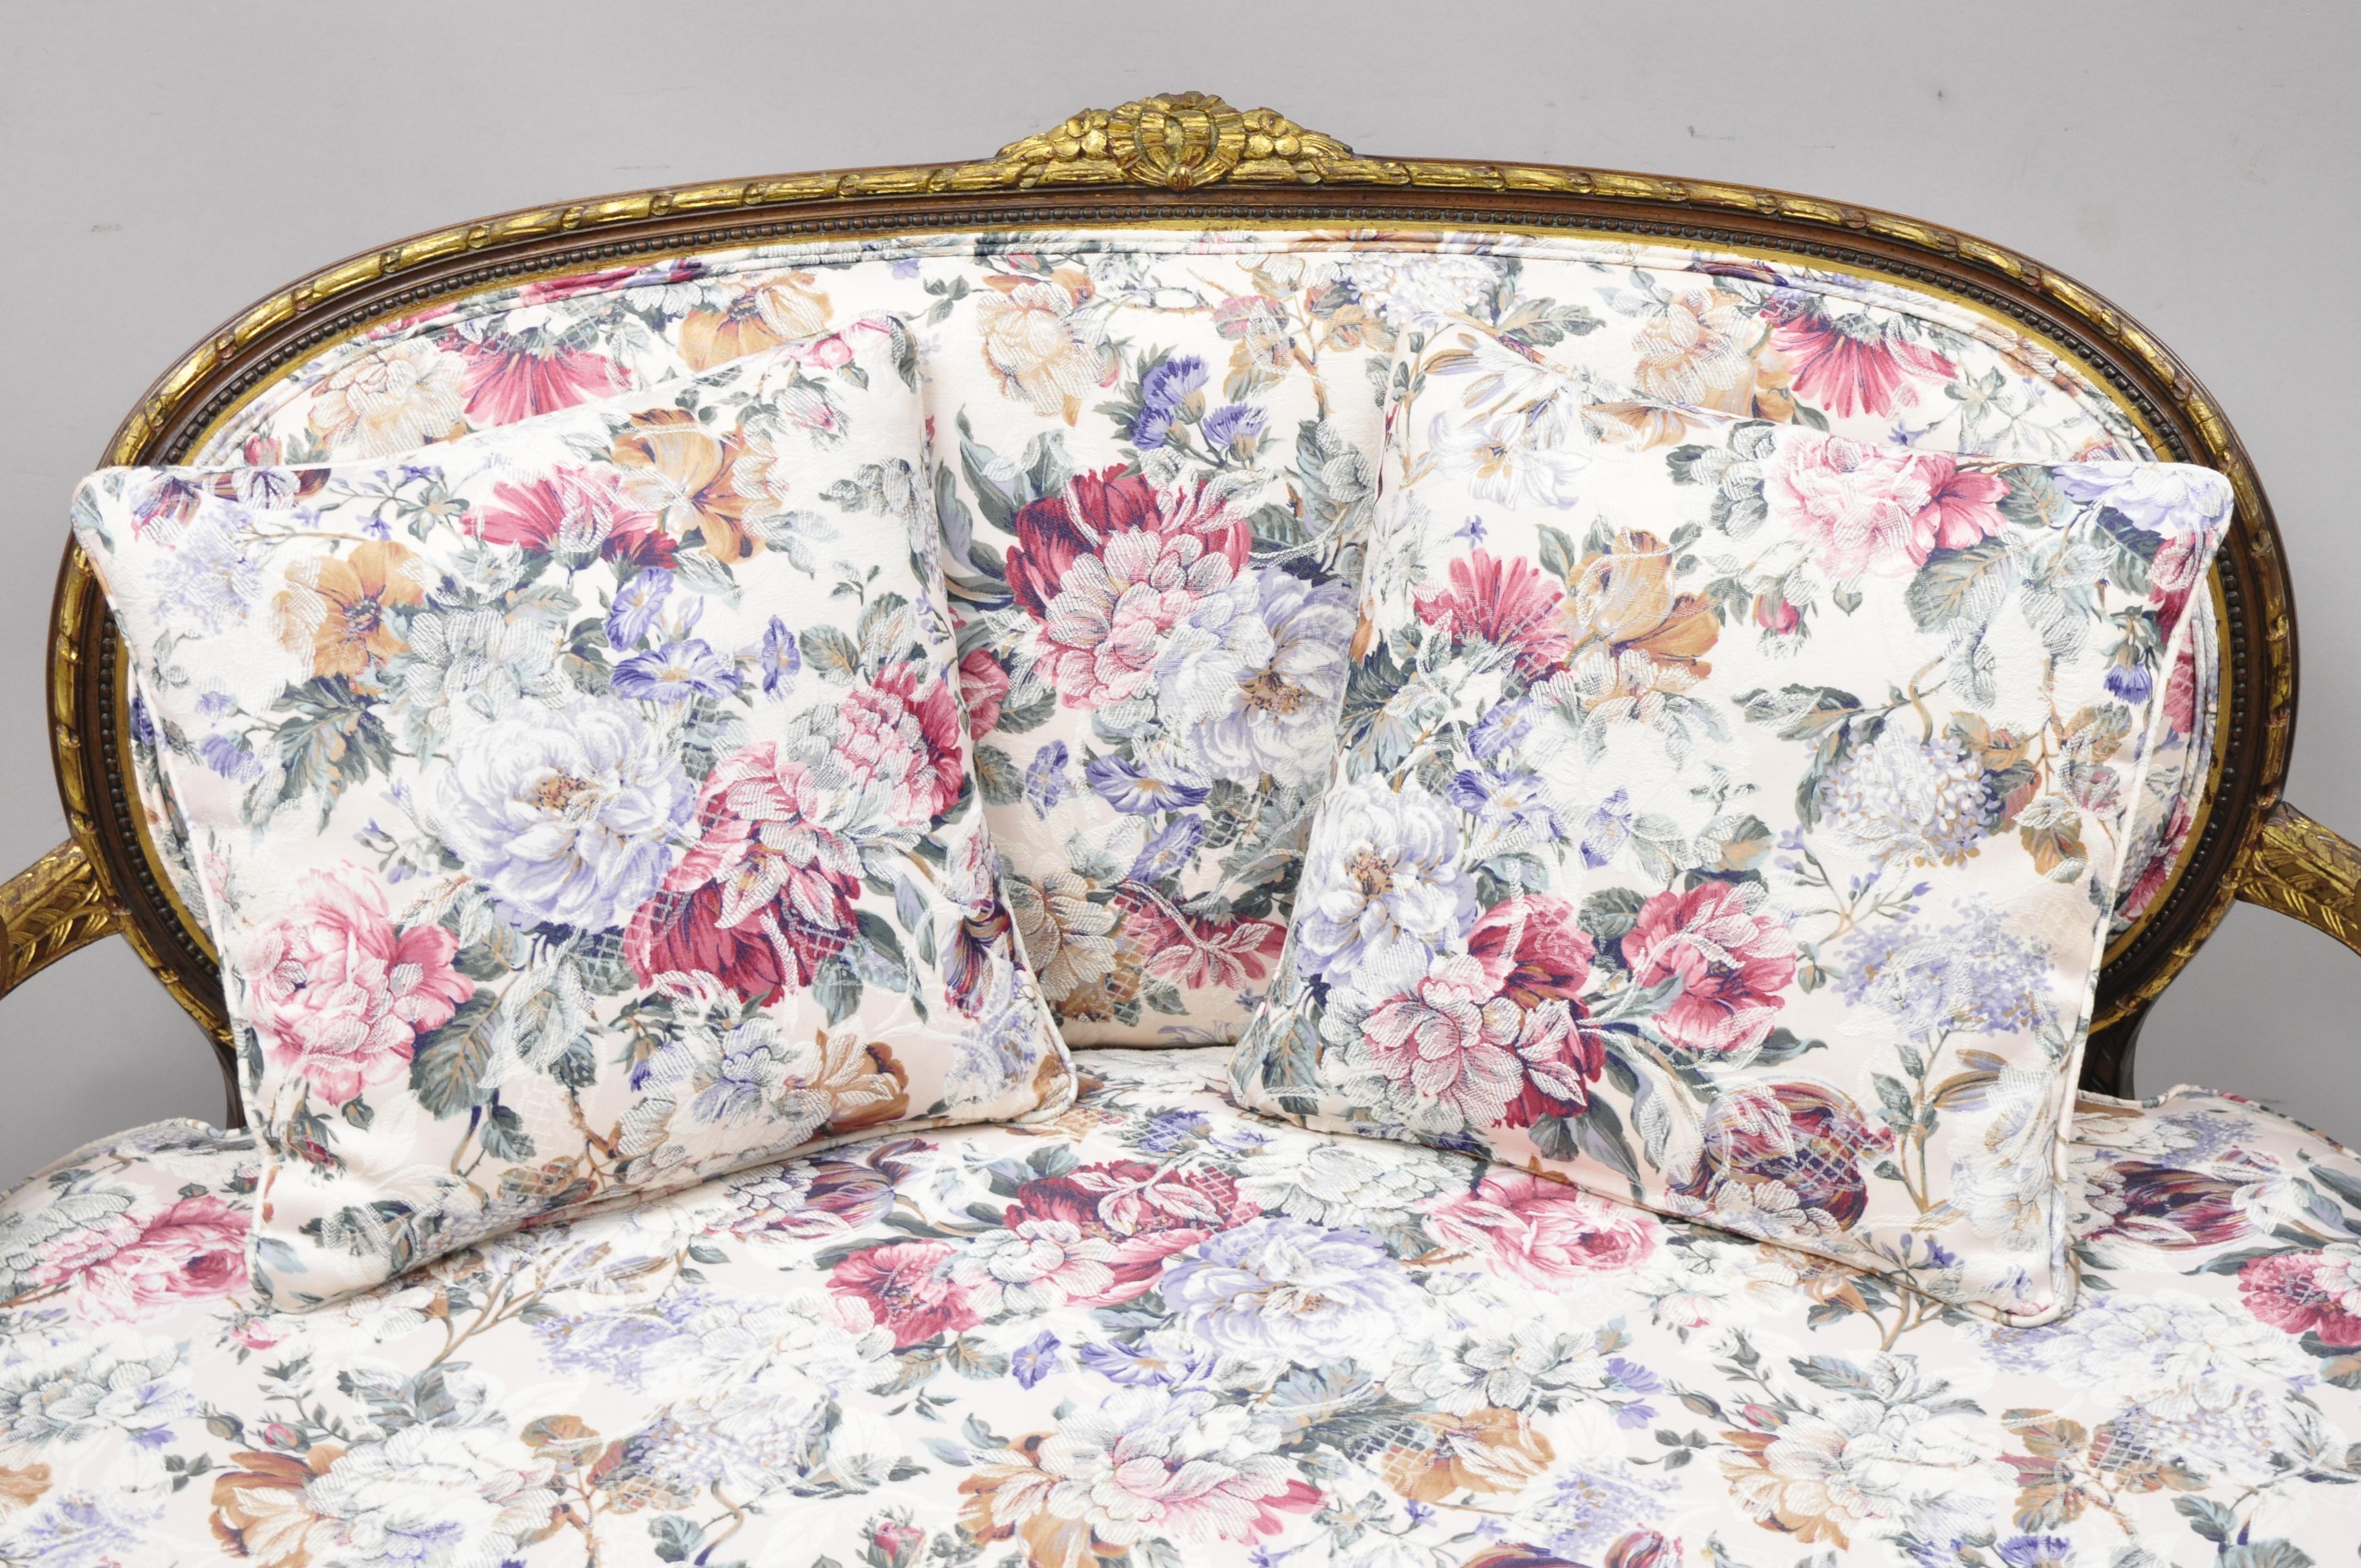 Vintage French Louis XVI gold giltwood floral upholstered loveseat settee sofa. Item features gold gilt accents, (2) loose pillows, floral fabric, solid wood frame, upholstered armrests, nicely carved details, tapered legs, very nice vintage item,